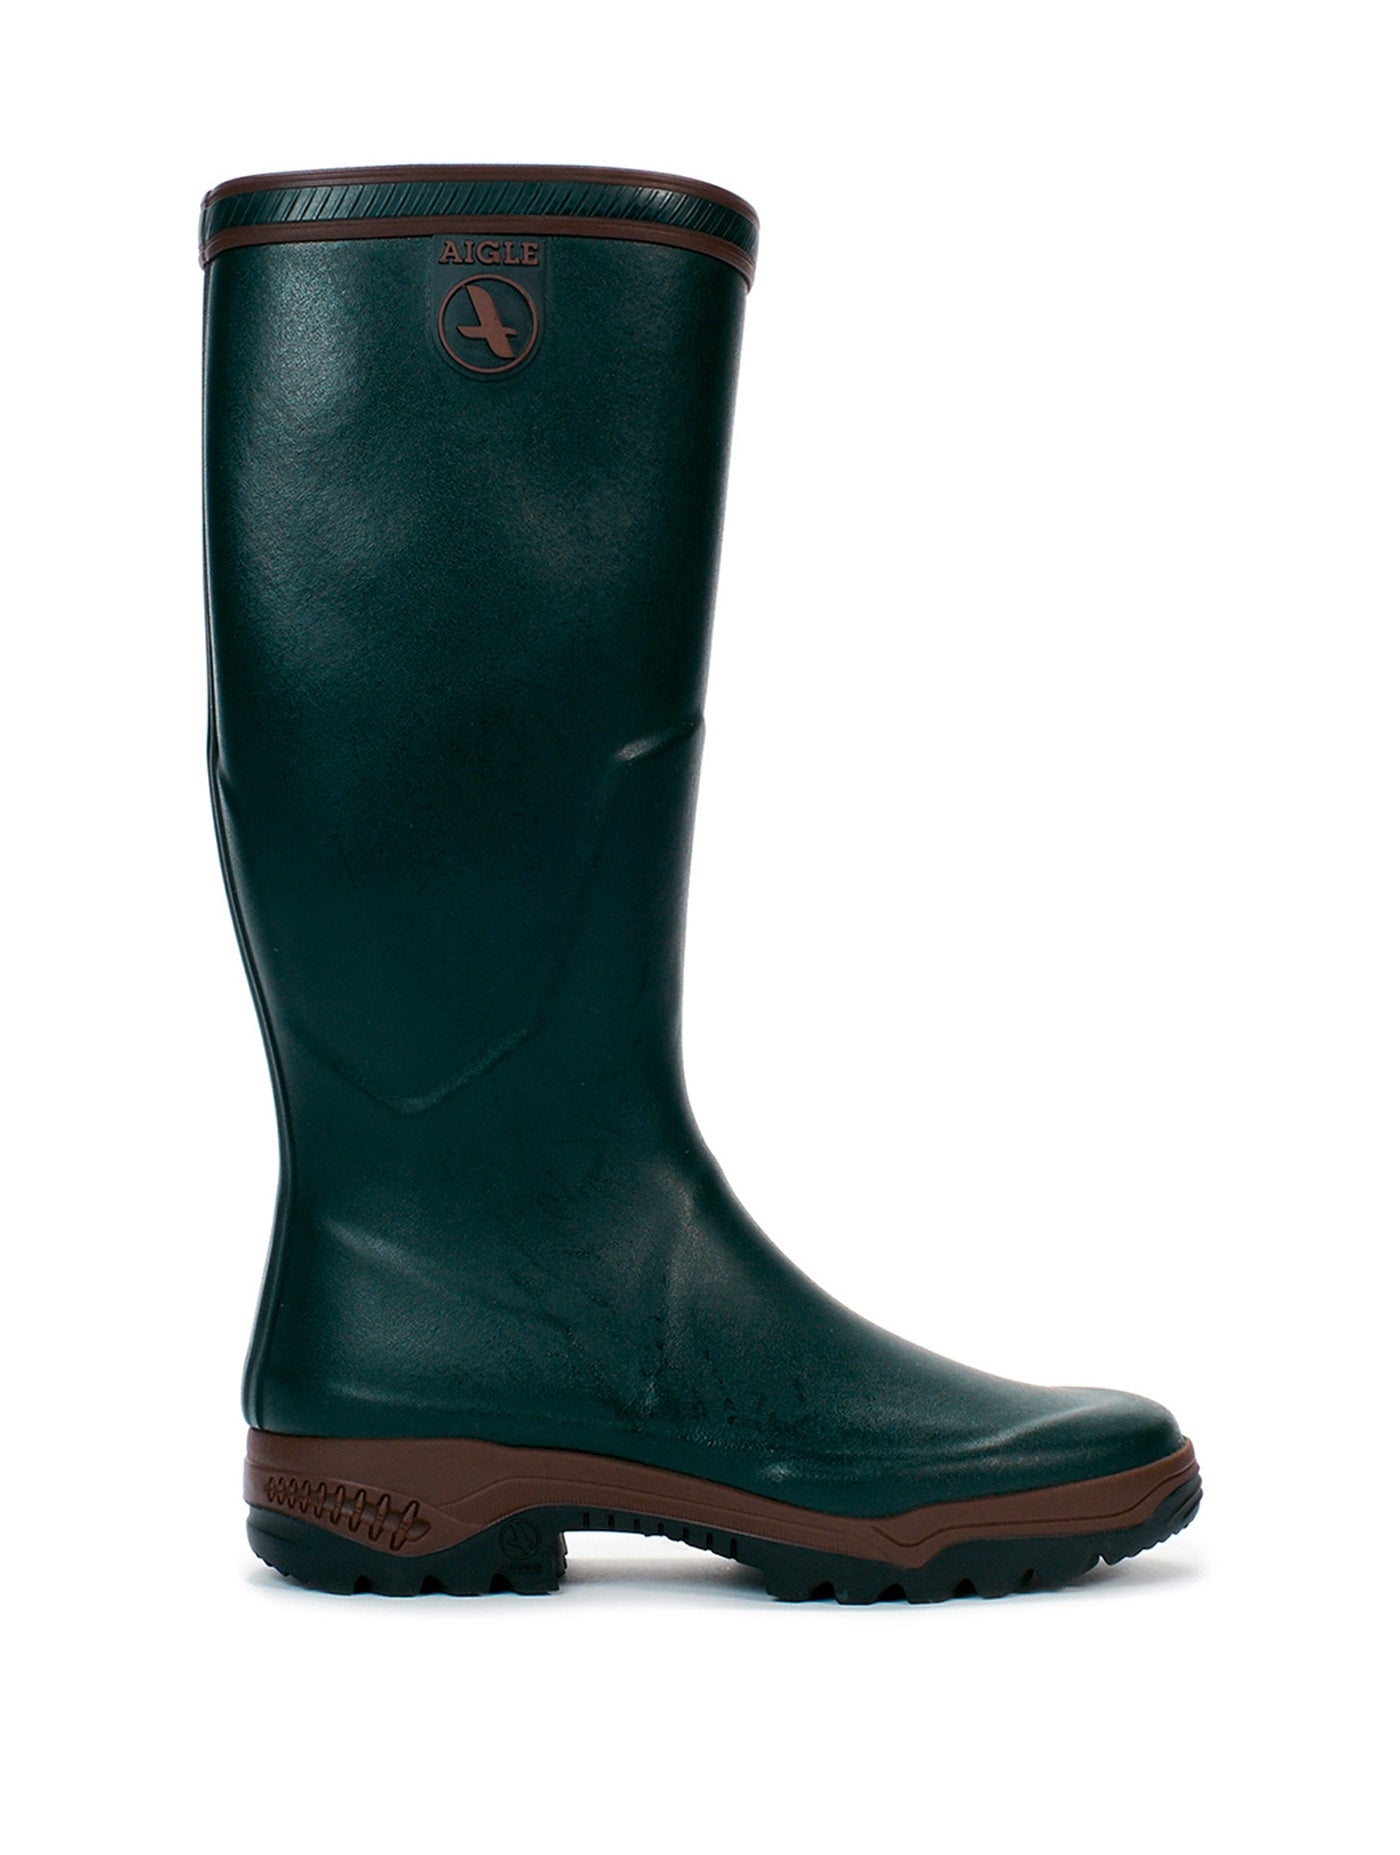 PARCOURS® 2 anti-fatigue Aigle hunting boots